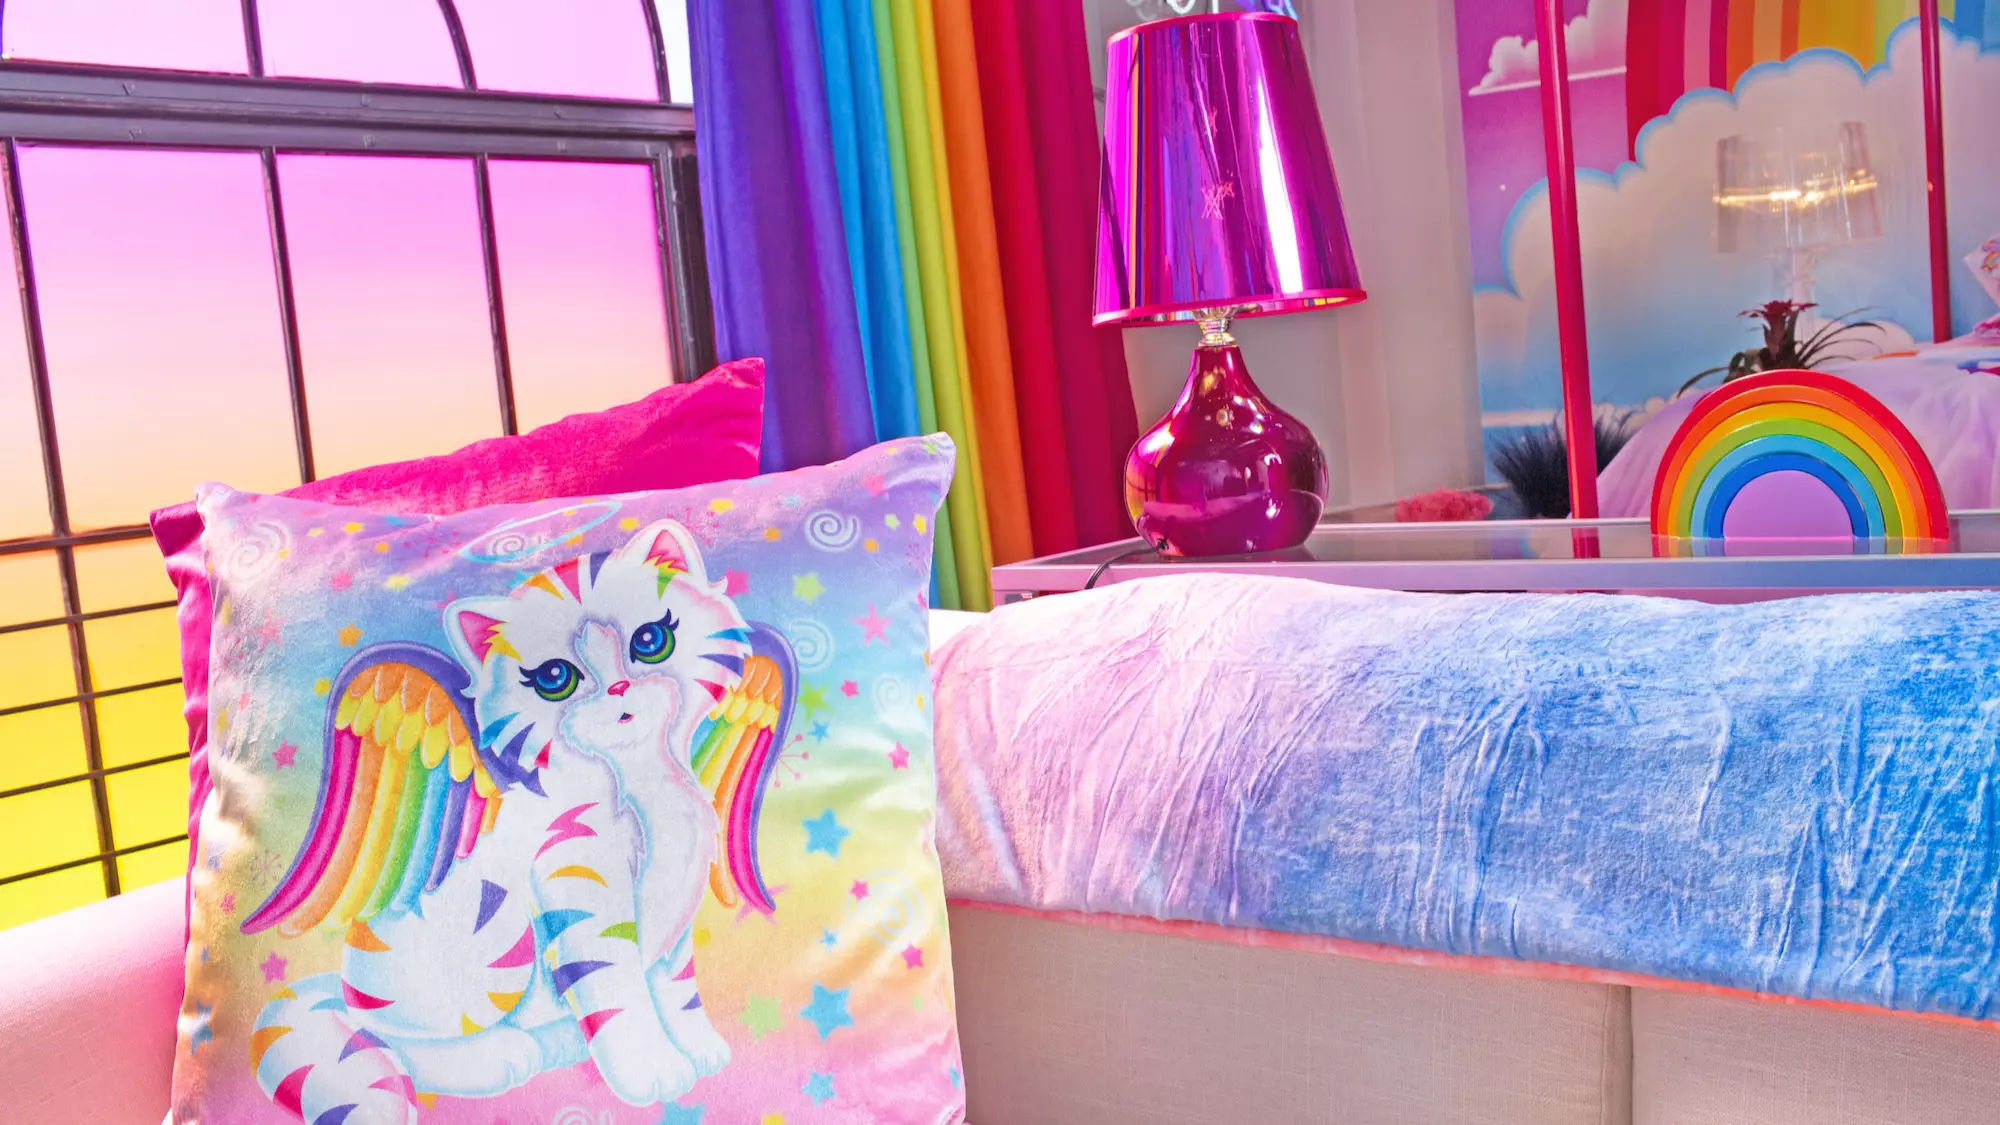 You Can Now Stay In A 1990s Themed Apartment And It's The Stuff Of Dreams